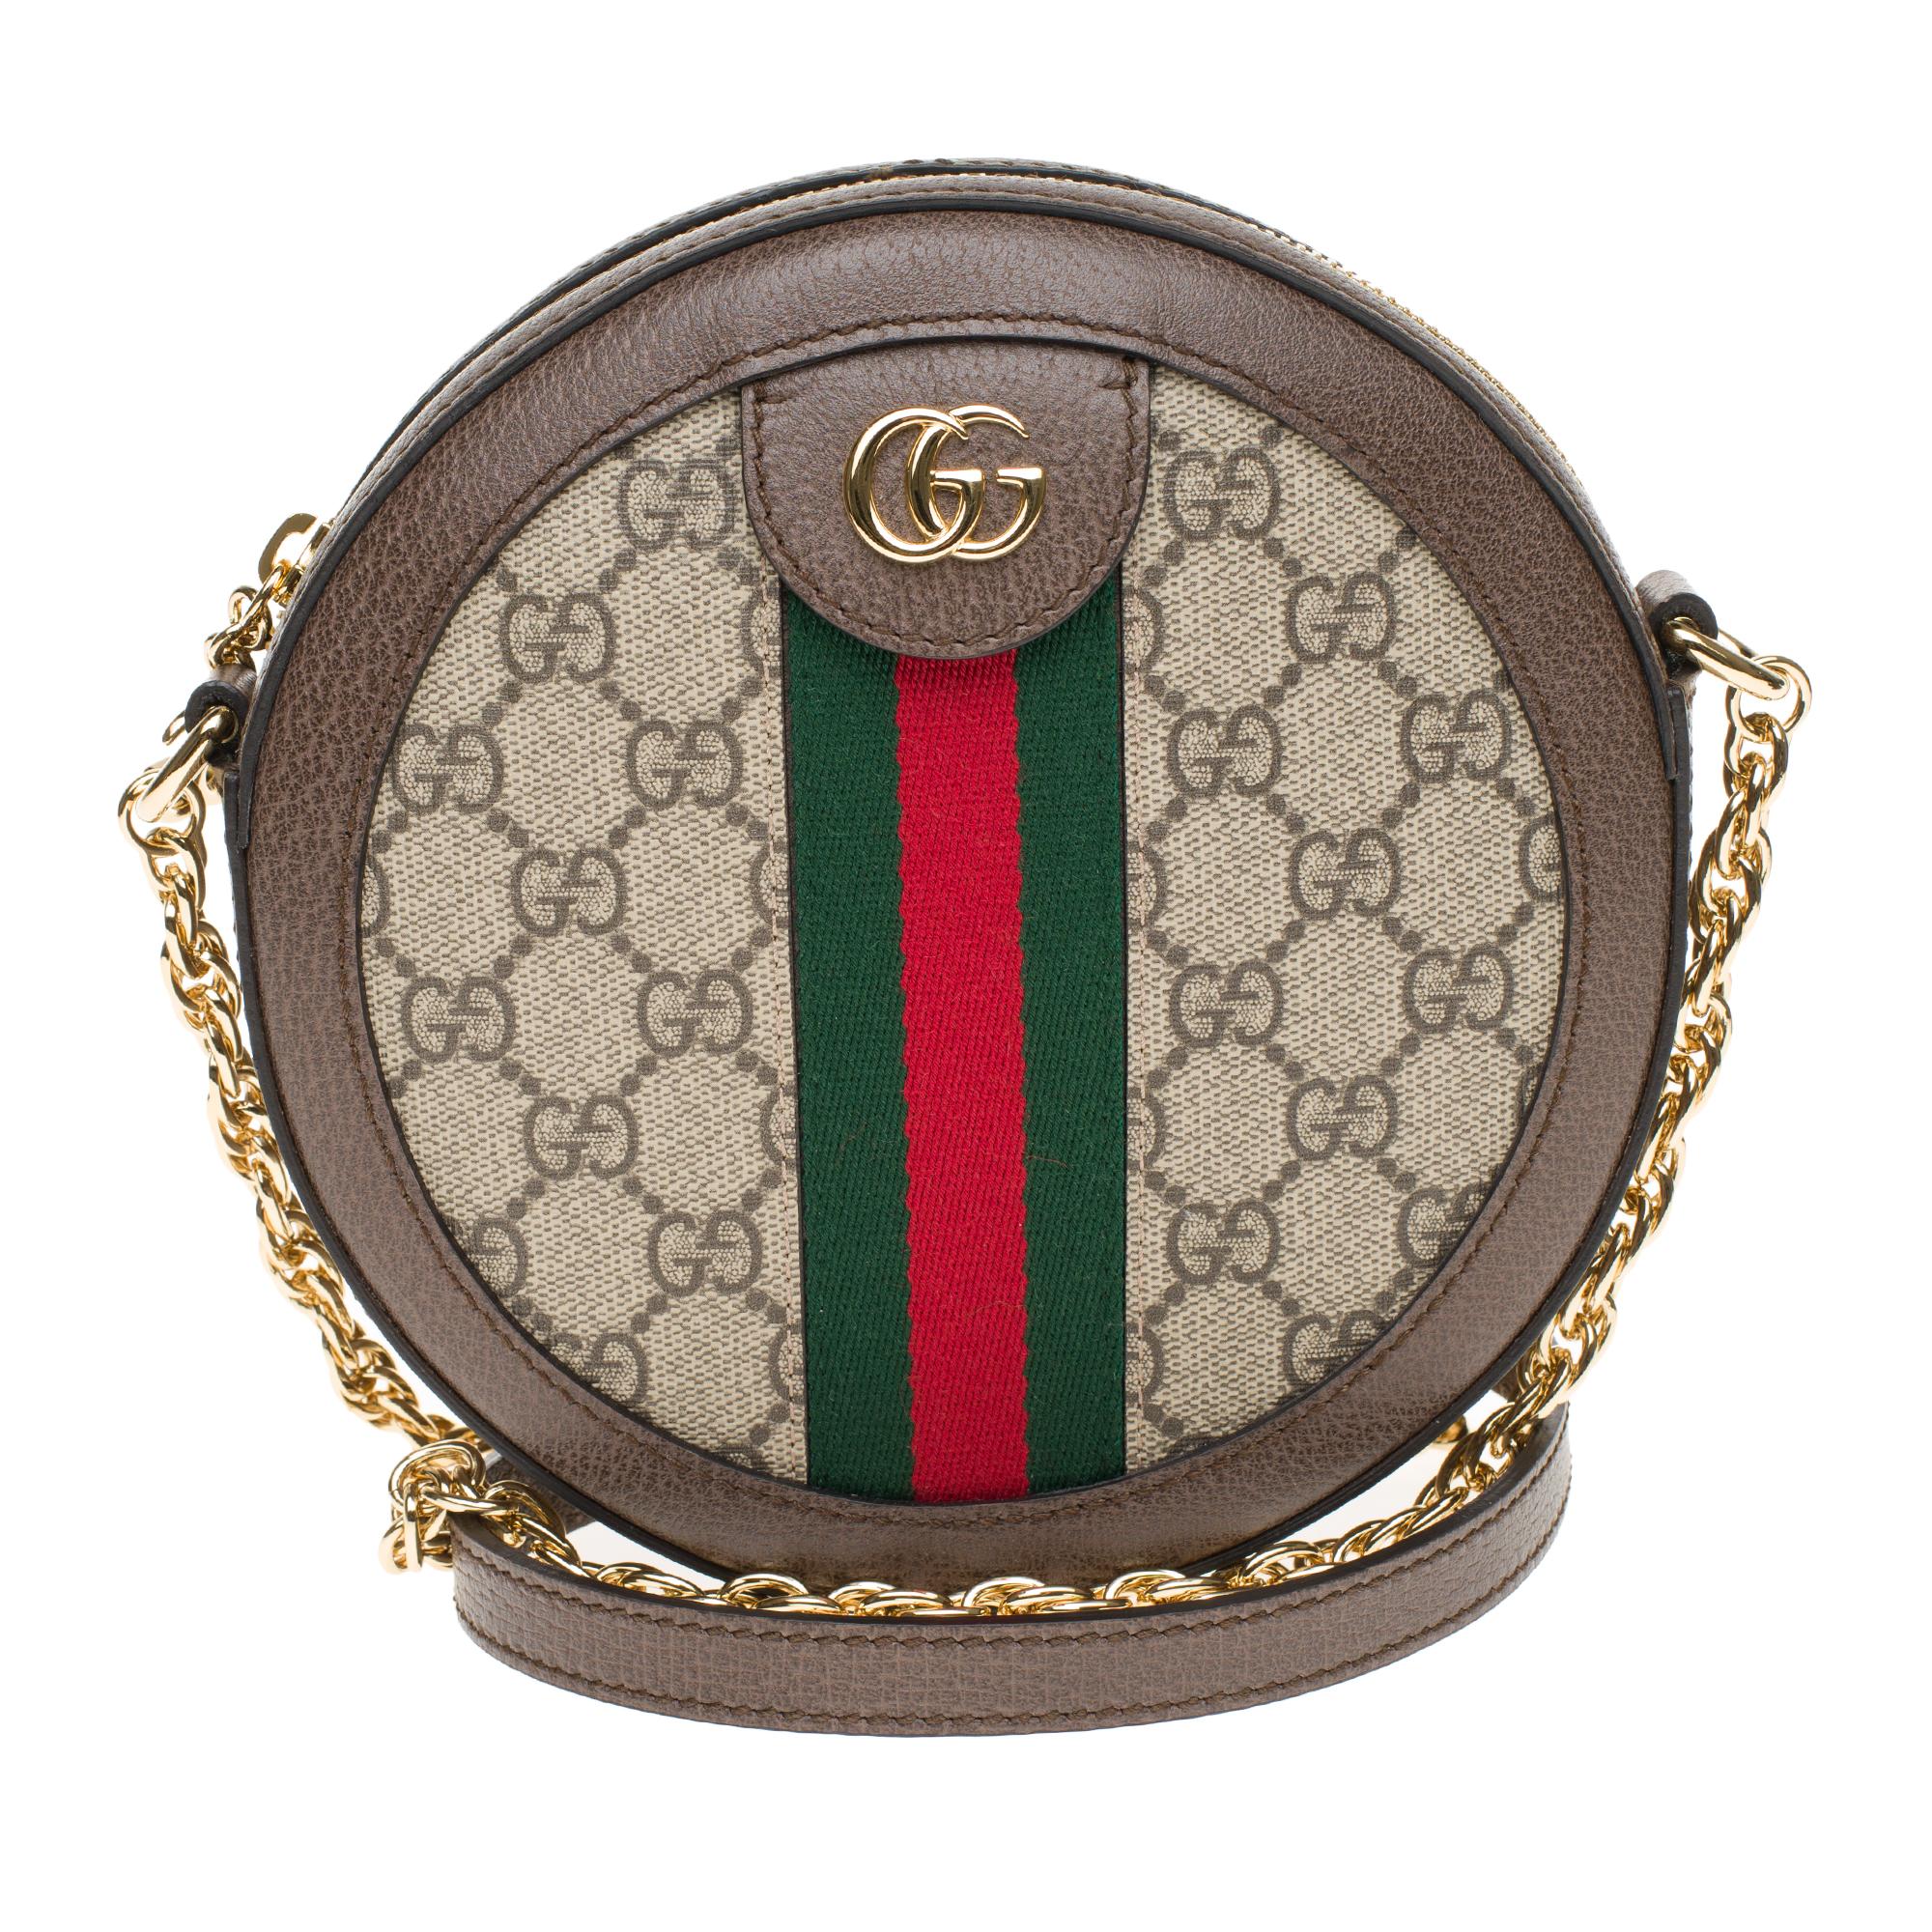 Gucci Ophidia bag round, embellished with a chain shoulder strap.
Crafted from Supreme GG canvas, inlaid with green and red web tape, the accessory features Double G detail from the Gucci archives of the 1970s. Revisited in a smaller version, it is